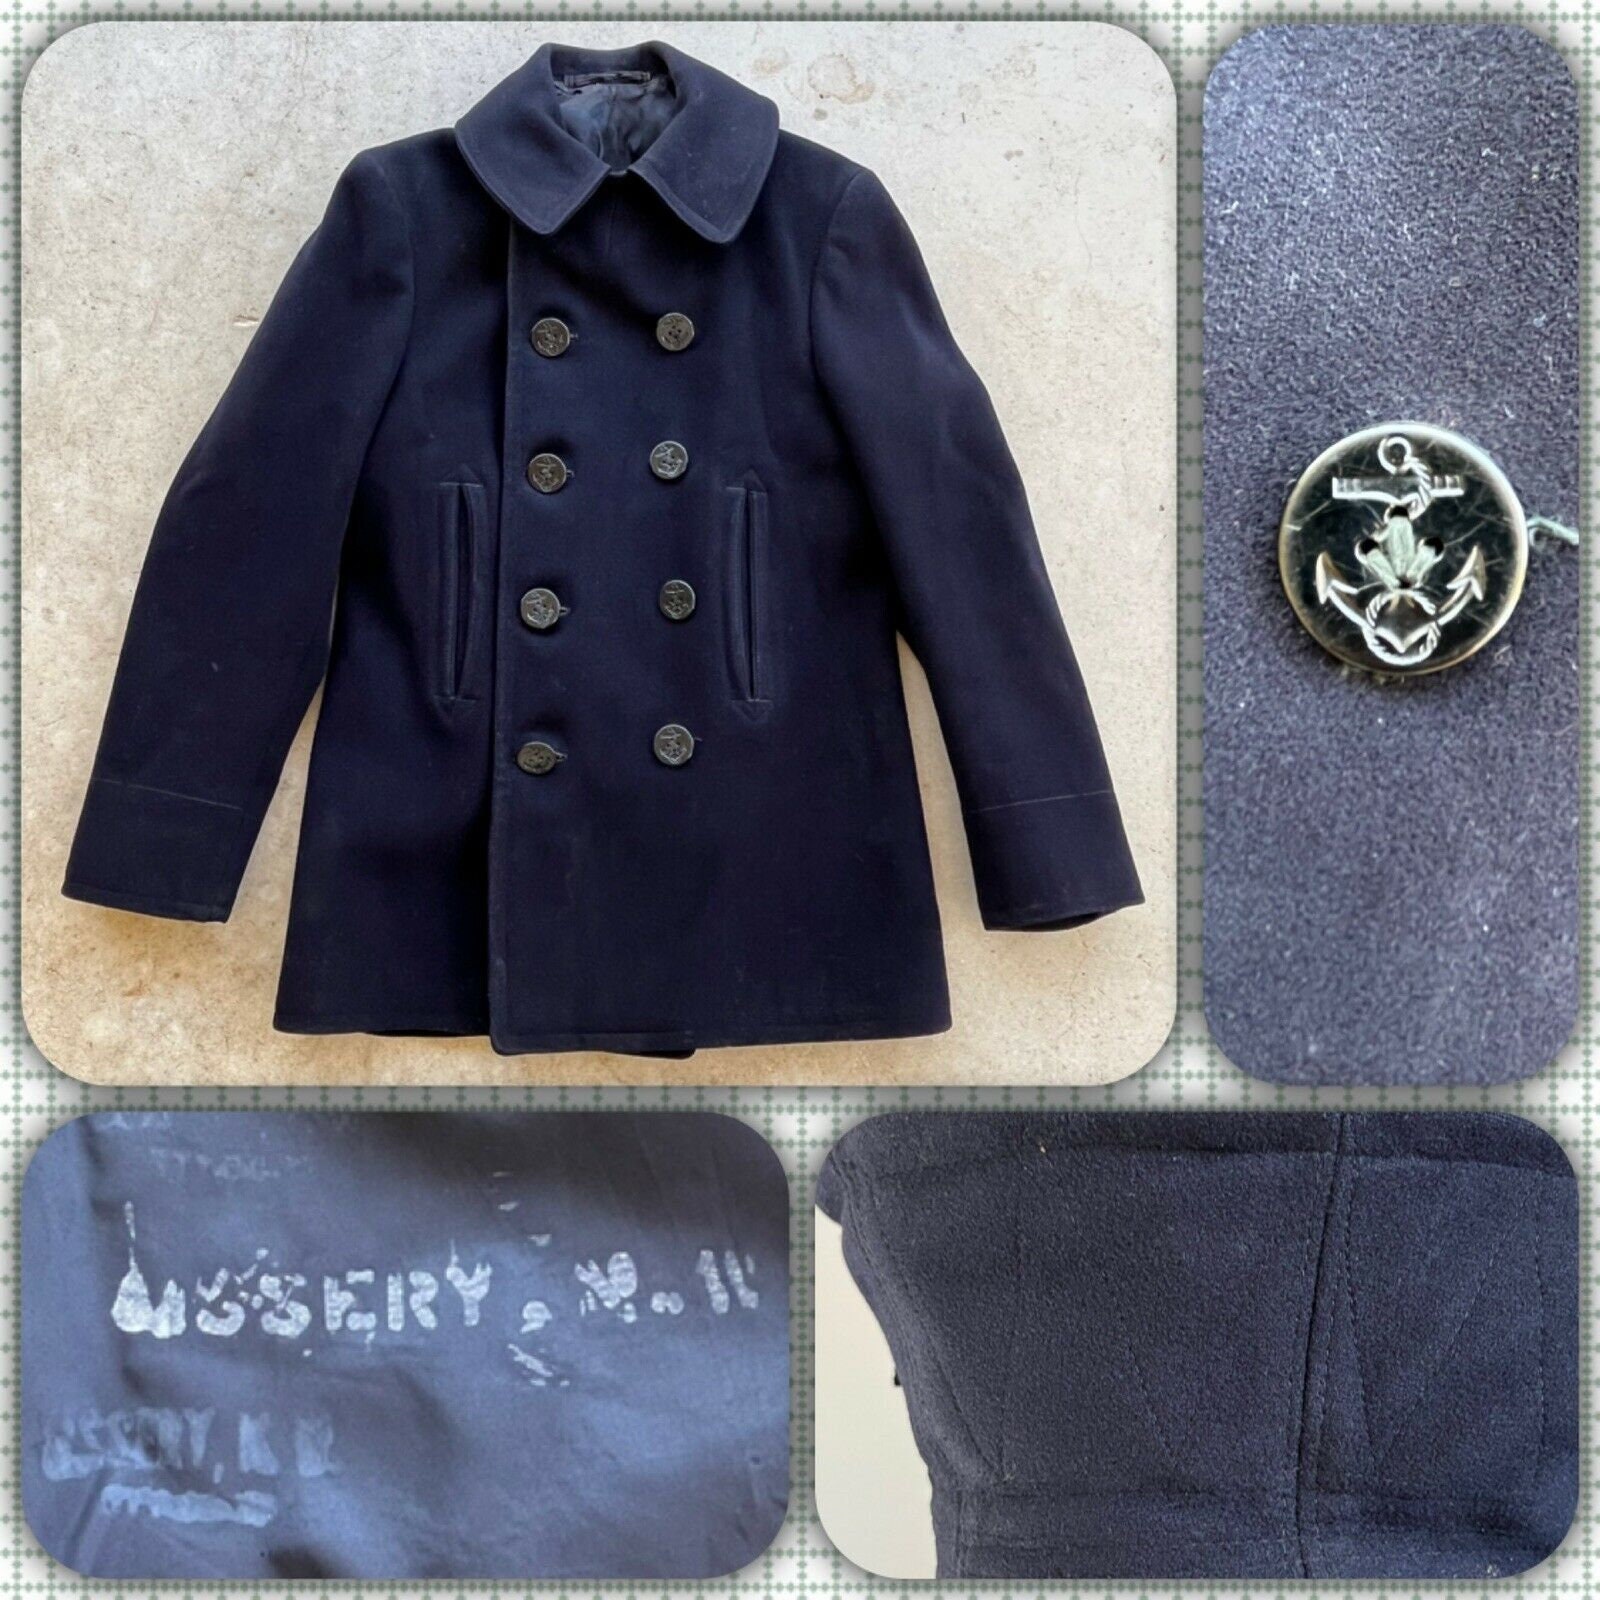 40s WWII US Navy Wool Peacoat 10 Button USN Military Side Medium Stenciled  WW2 Naval Melton Wool Peacoat Military Uniform Jacket Navy Blue